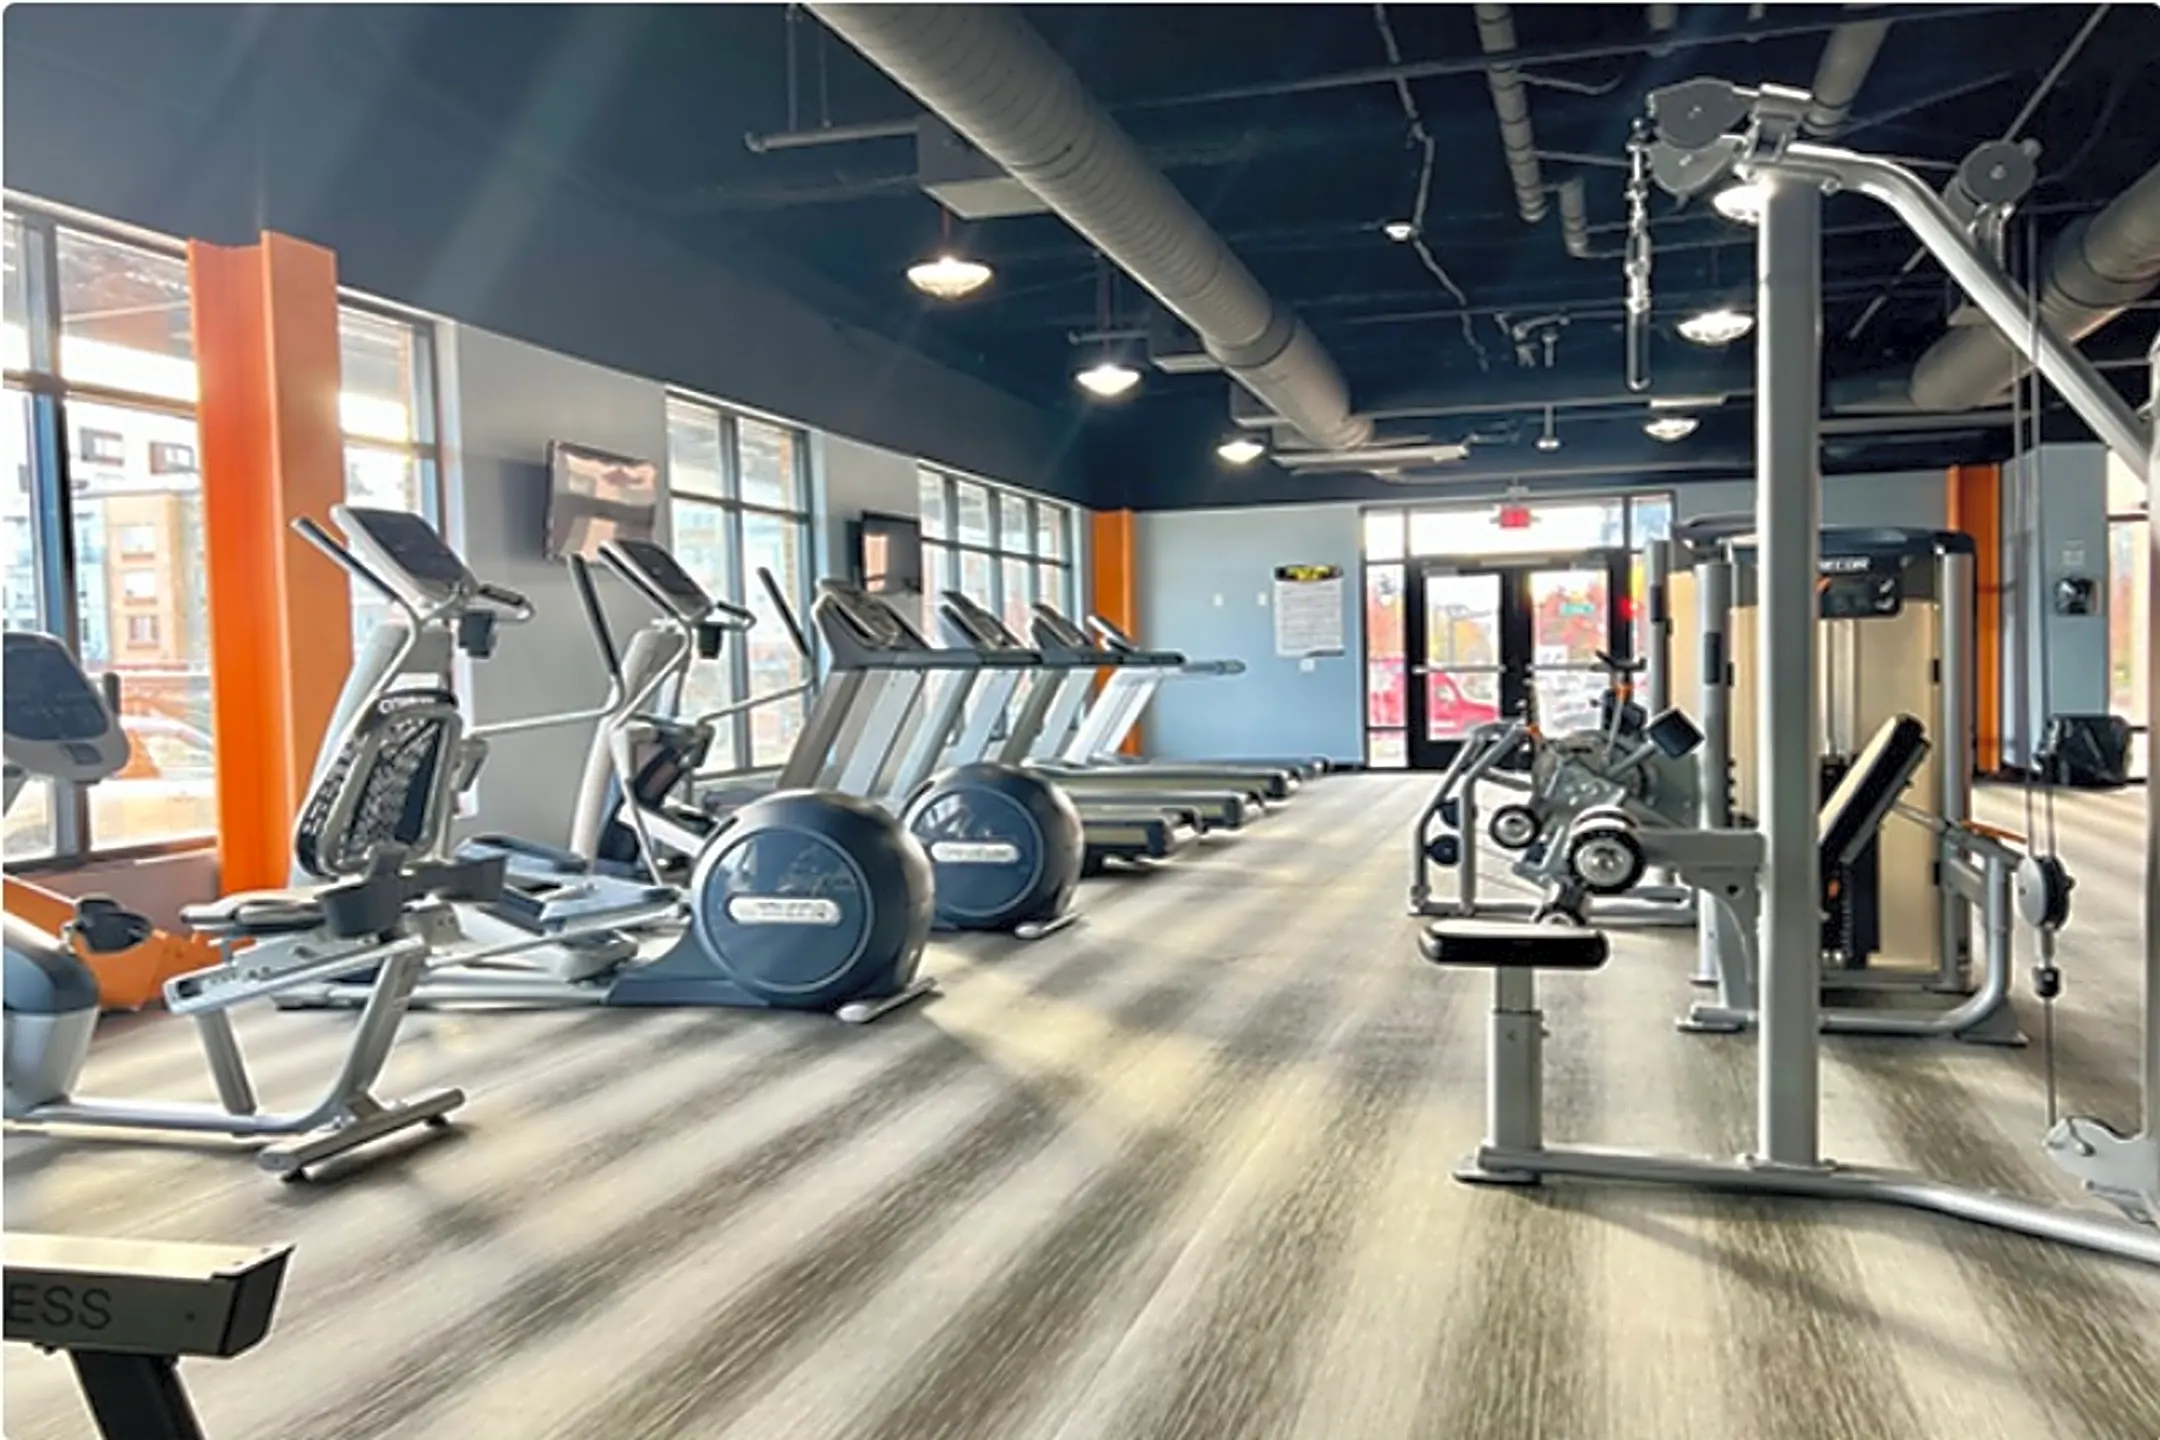 Fitness Weight Room - 602 Frank E Rodgers Blvd S - Harrison, NJ